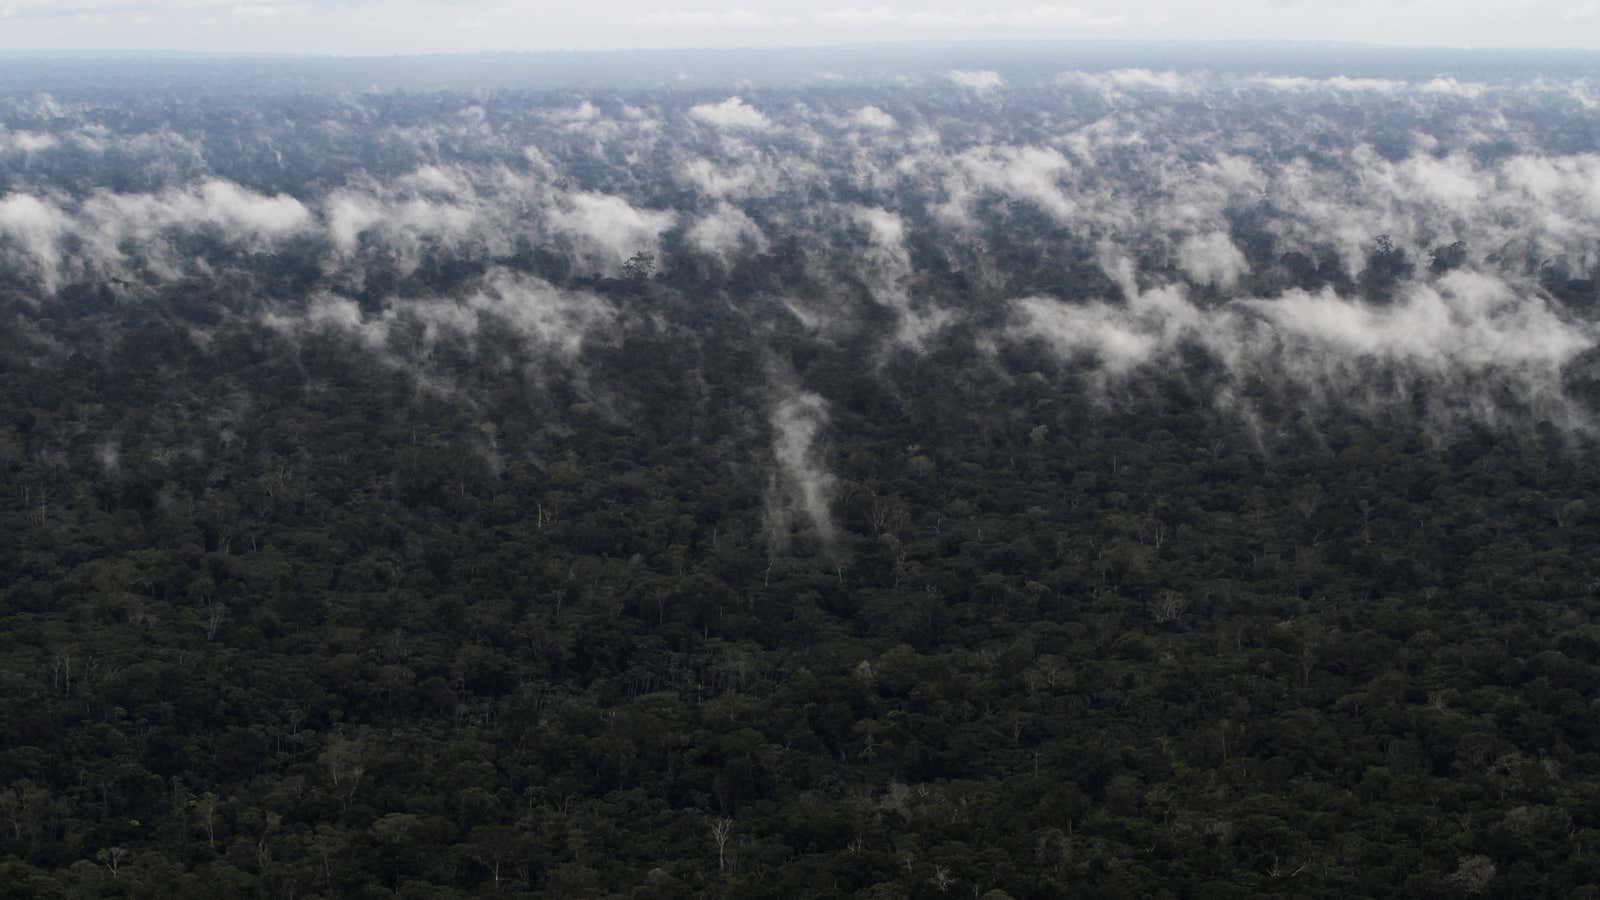 An aerial view shows the Amazon rainforest near the city of Santarem, Para State, Brazil